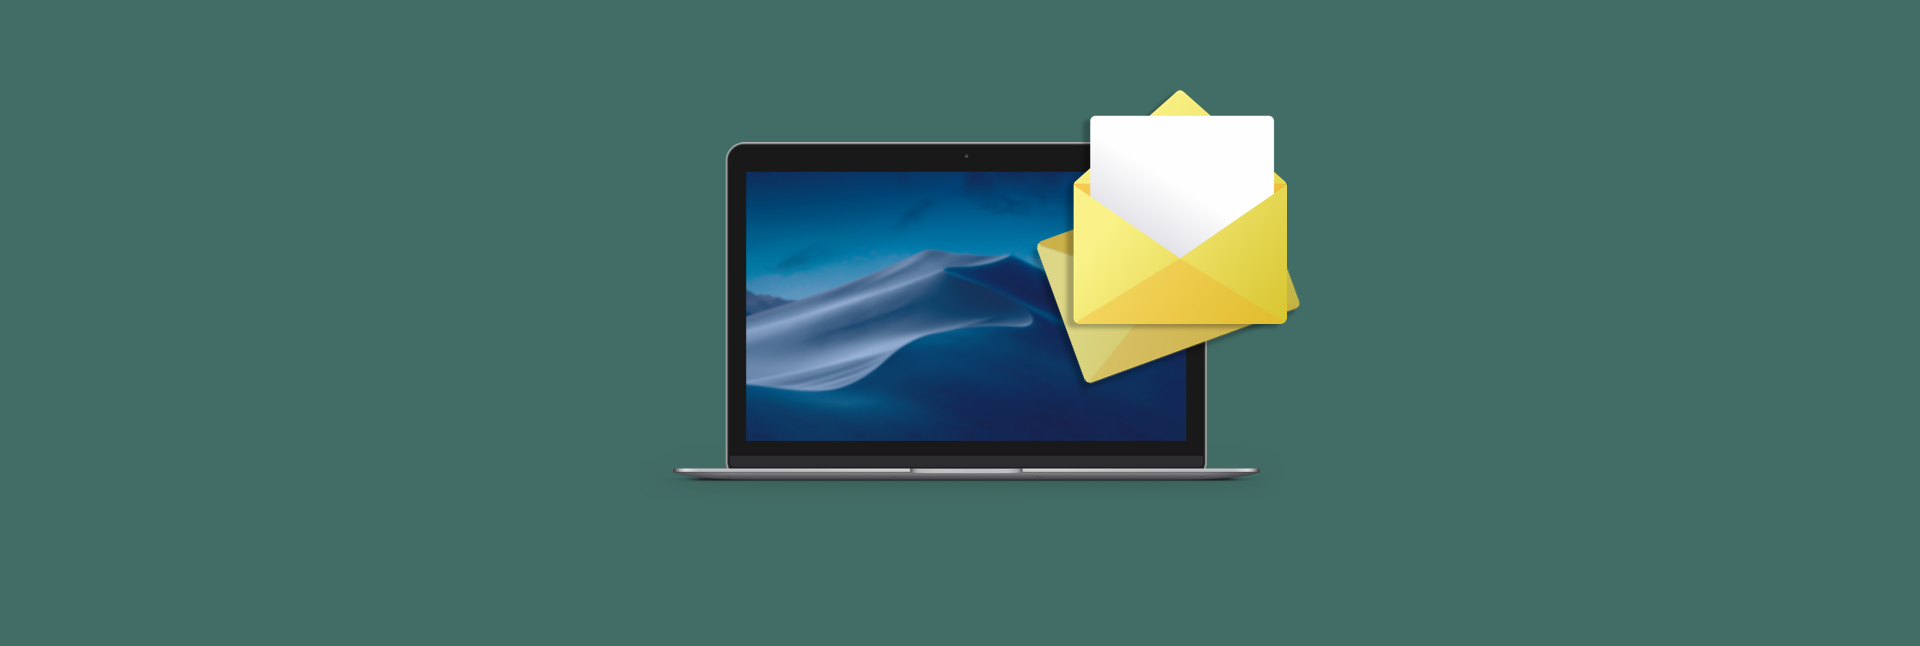 best email client for mac 2018 offline